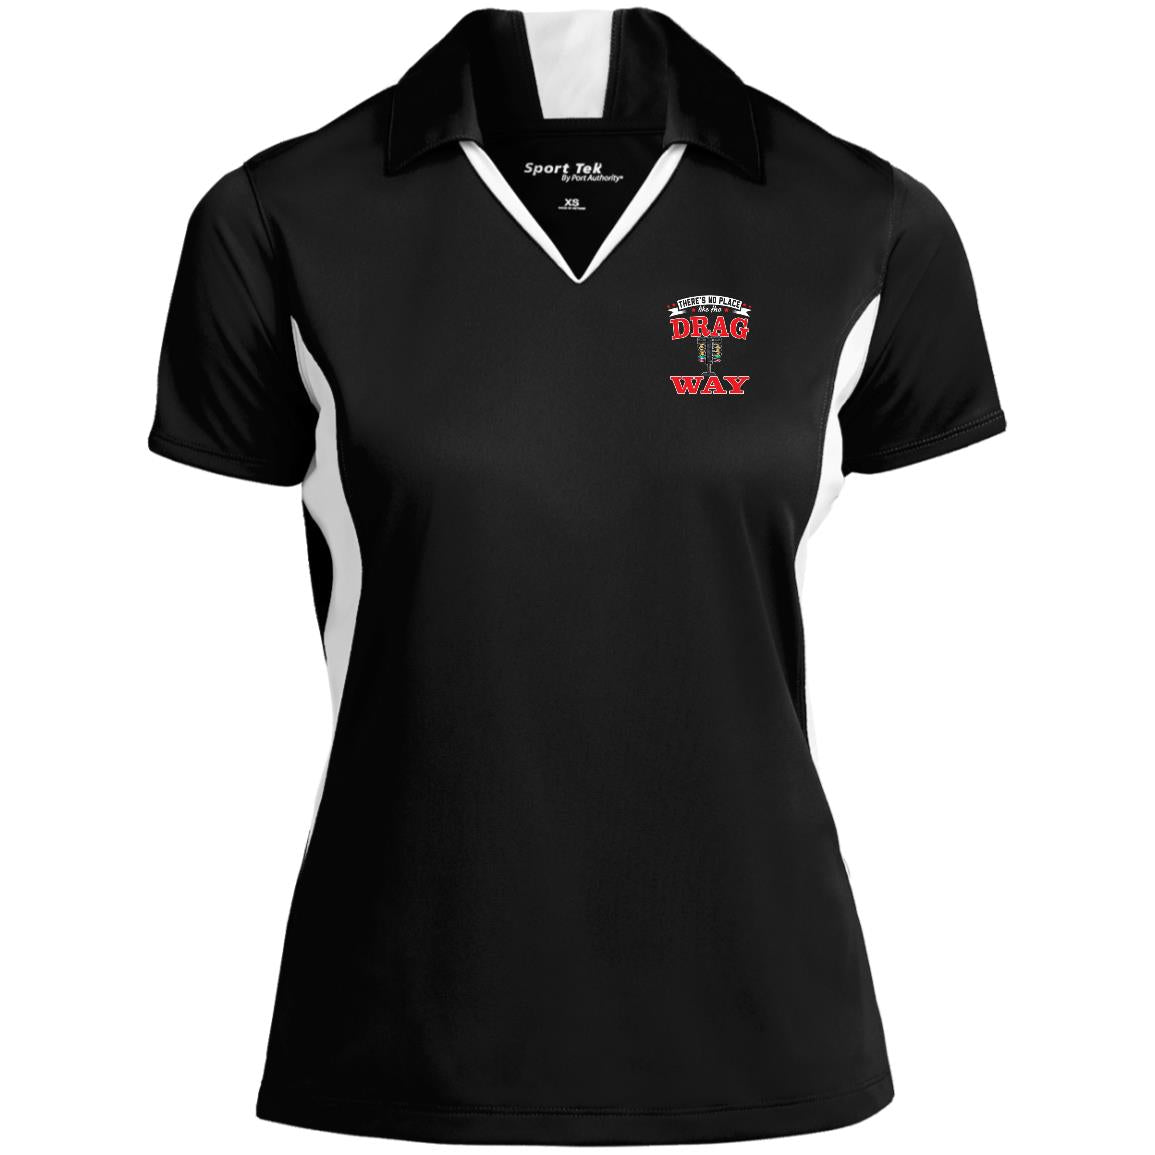 There's No Place Like The Dragway Ladies' Colorblock Performance Polo